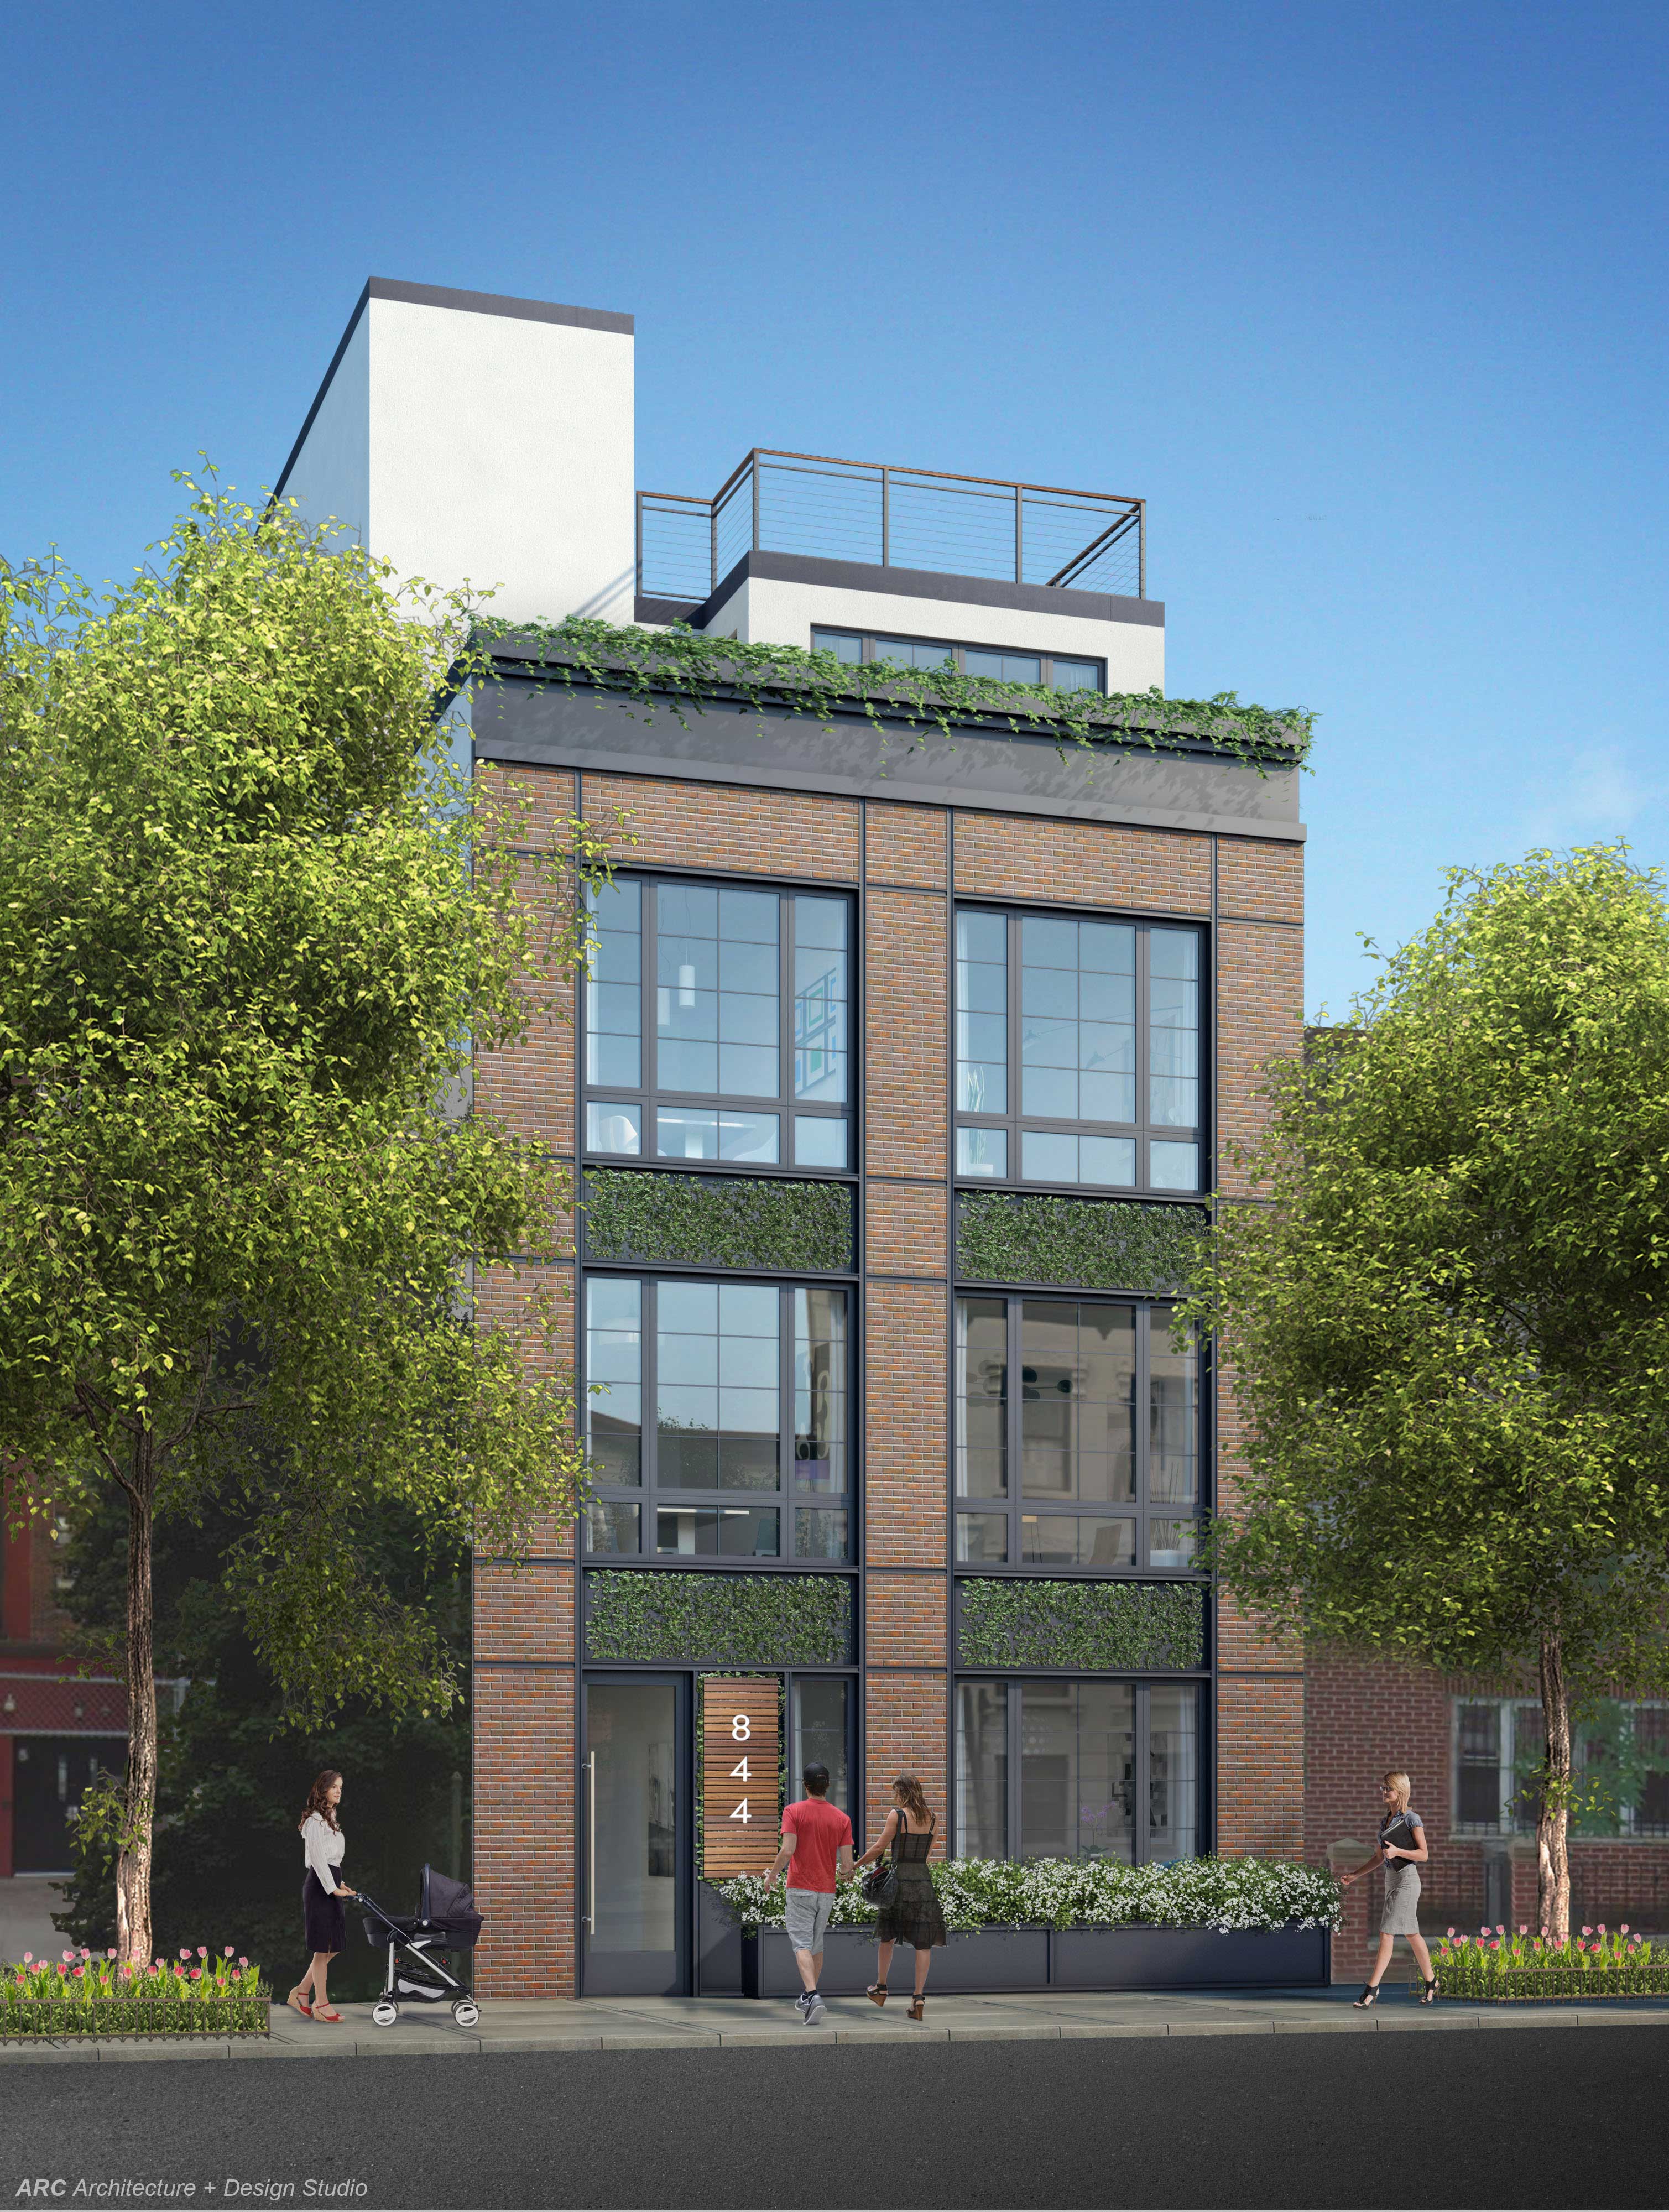 844 Quincy Street, rendering by Robert Bianchini's ARC Architecture and Design